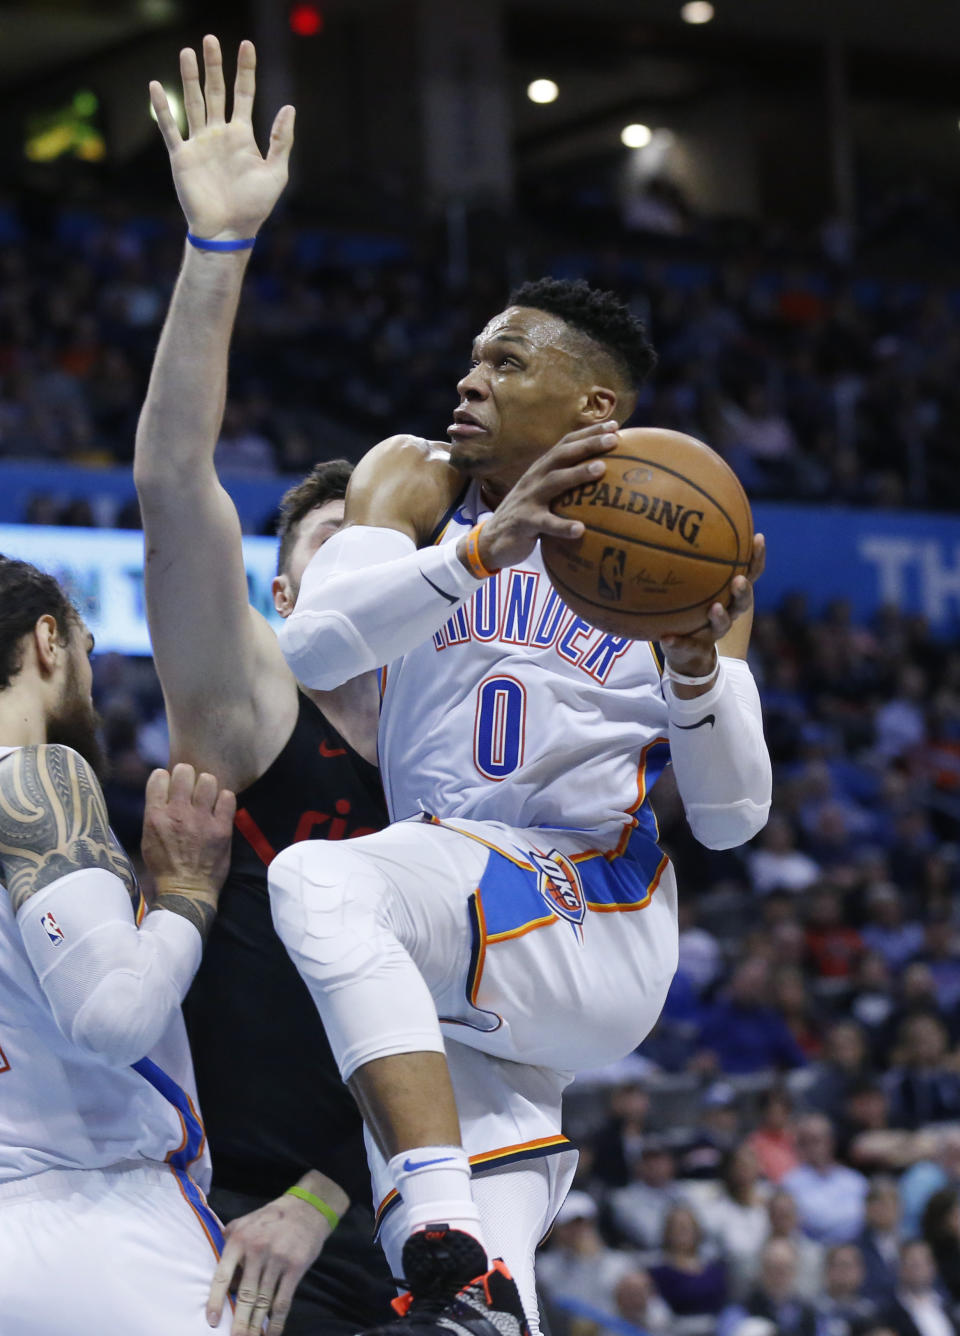 Oklahoma City Thunder guard Russell Westbrook, right, goes to the basket past Portland Trail Blazers center Jusuf Nurkic, center, in the first half of an NBA basketball game in Oklahoma City, Monday, Feb. 11, 2019. (AP Photo/Sue Ogrocki)